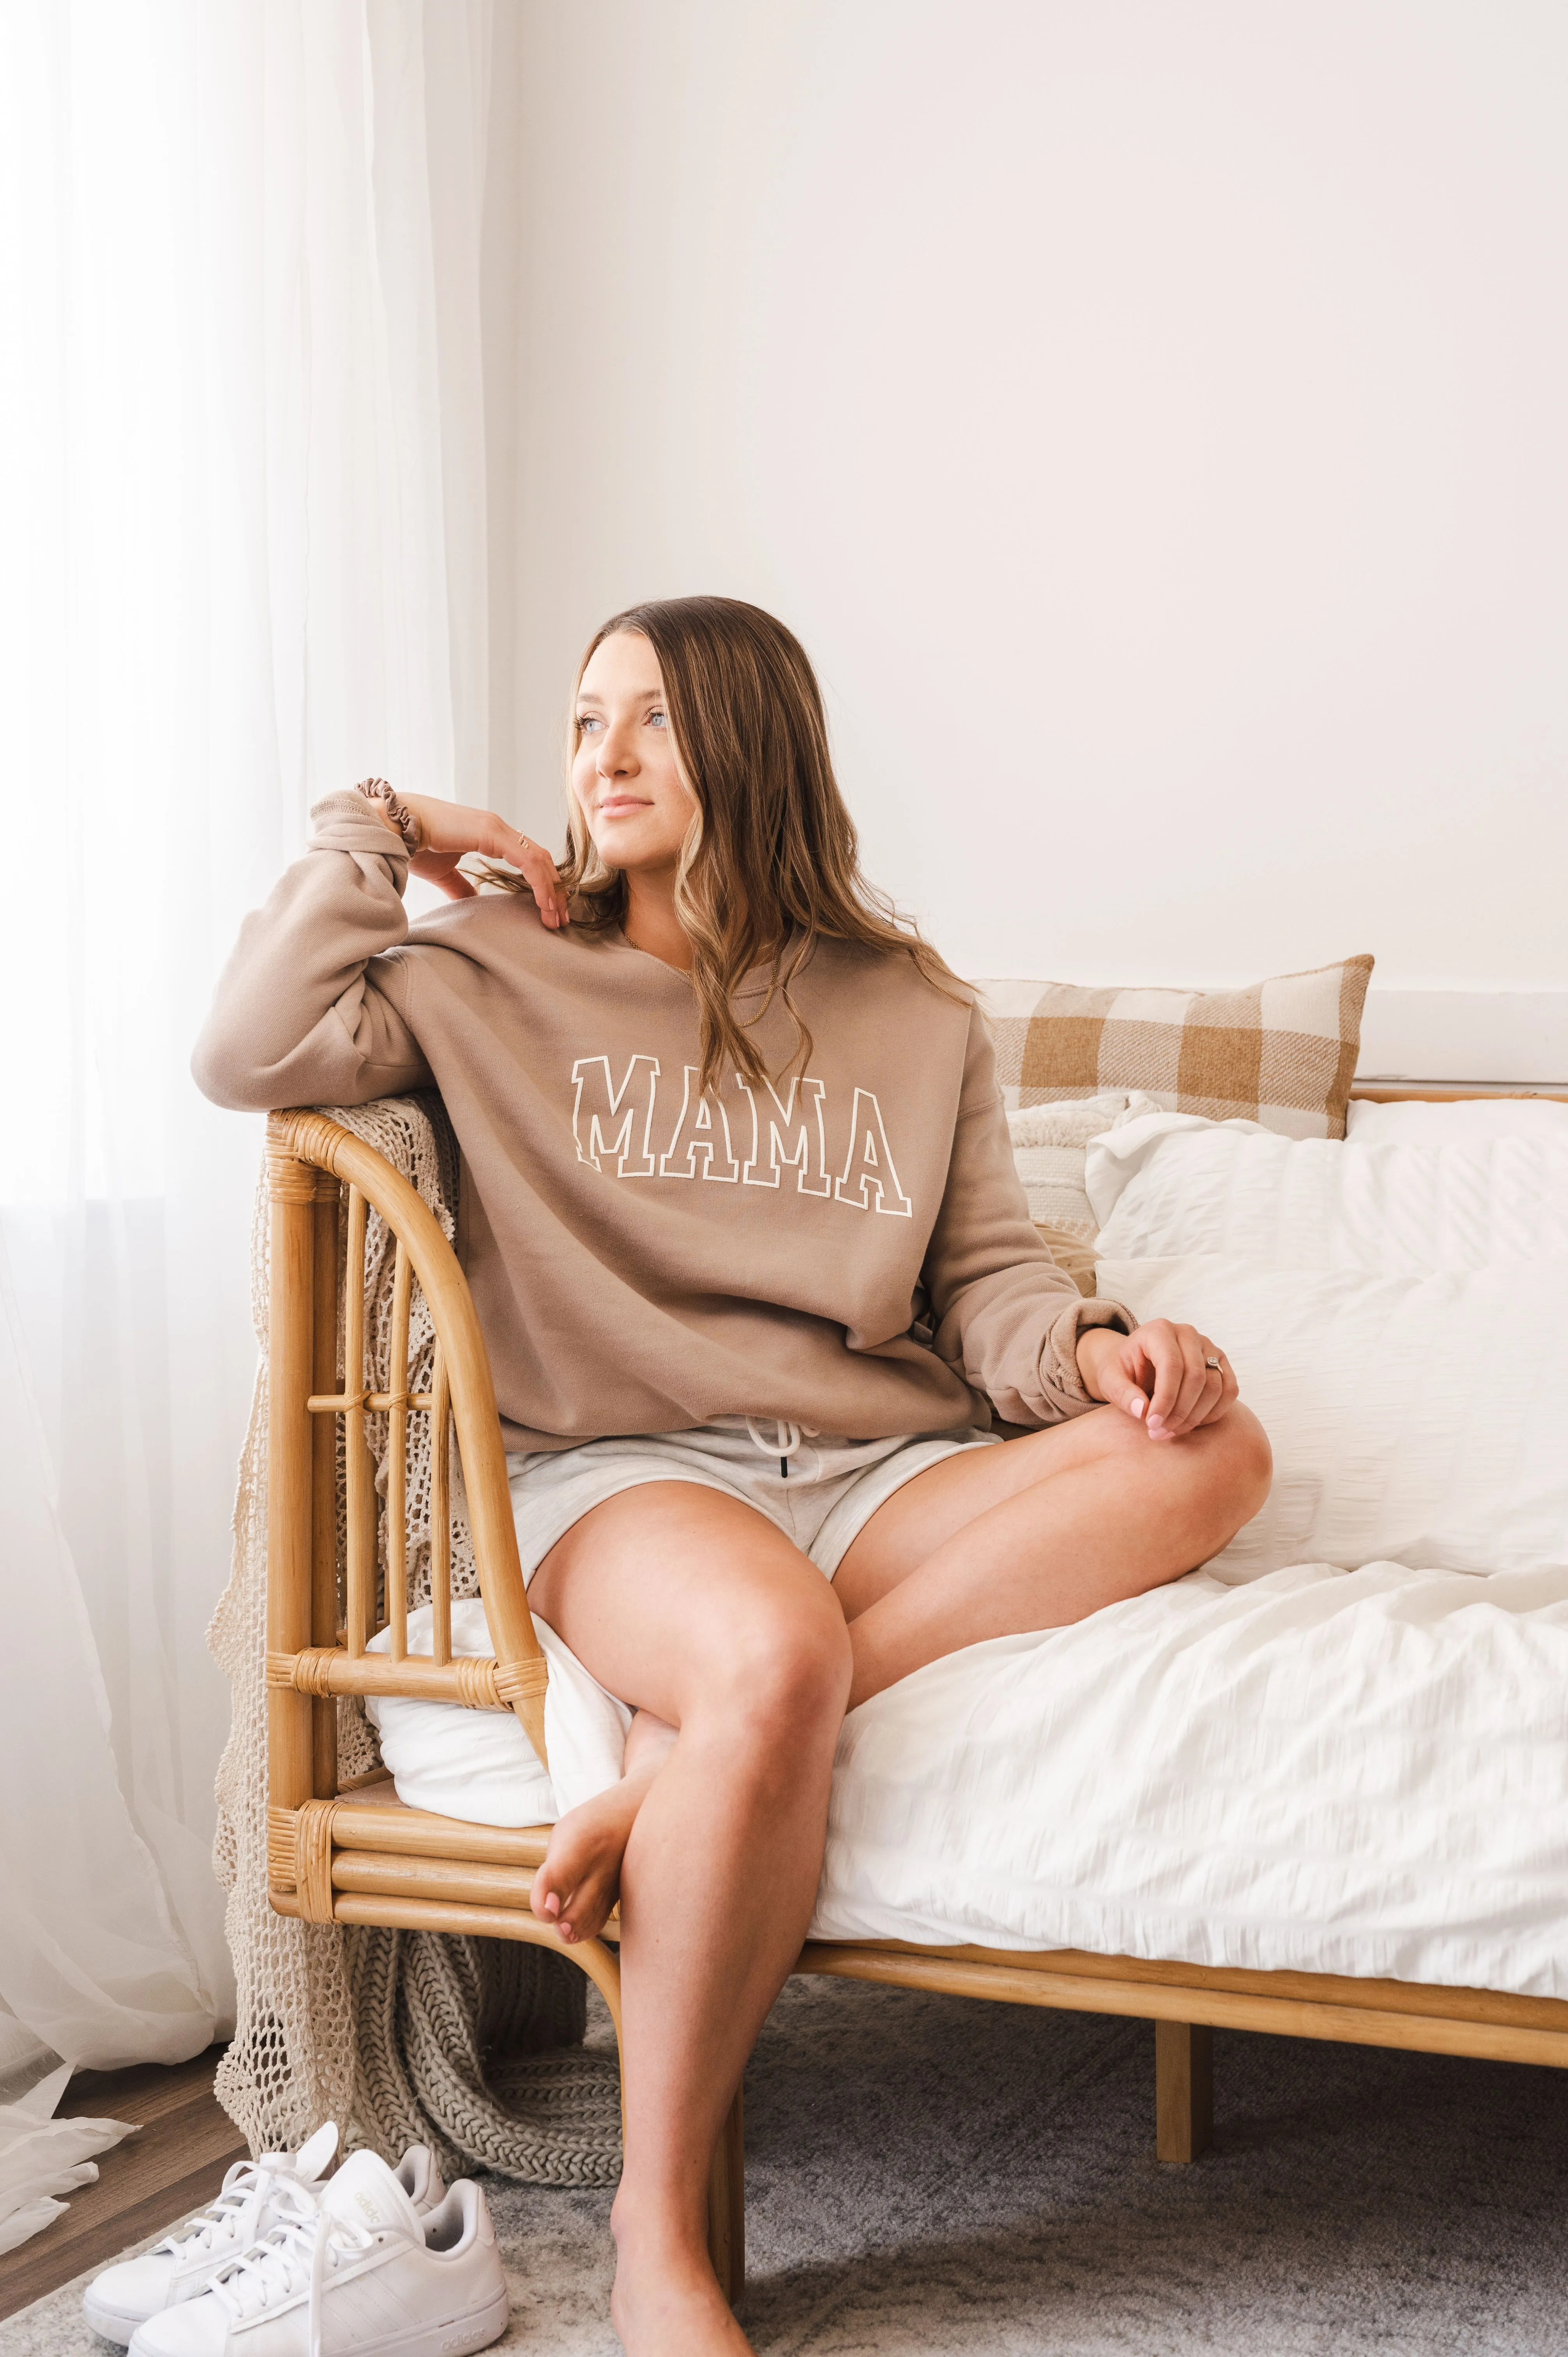 Woman sitting on a rattan chair in a cozy bedroom, wearing a "MAMA" sweatshirt and shorts, with white sneakers on the floor.